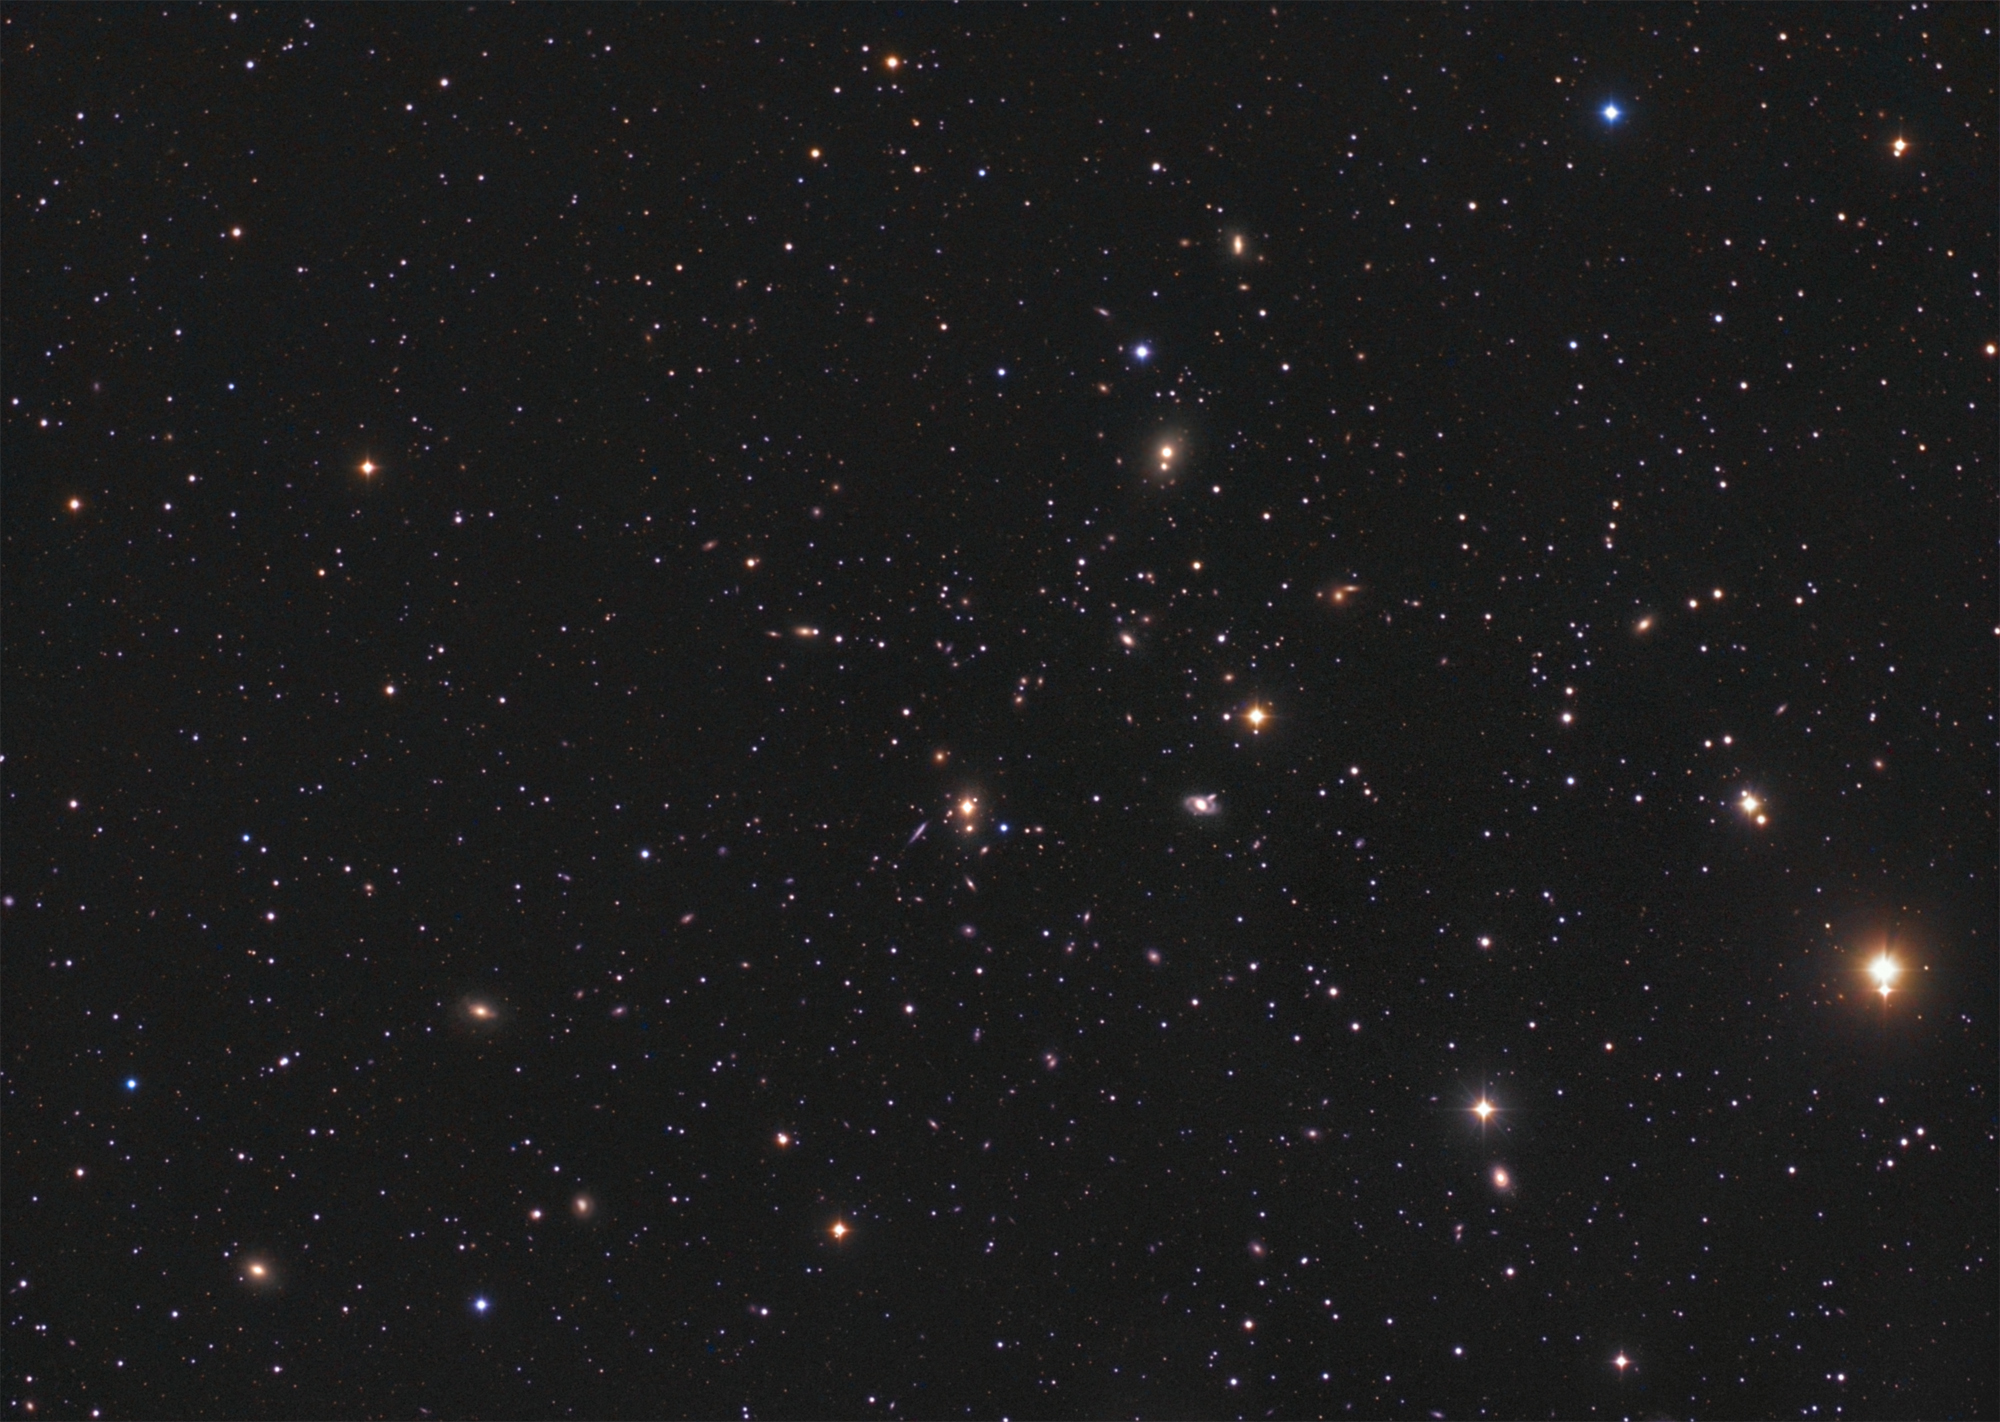 Leo Galactic Cluster (Abell 1367)